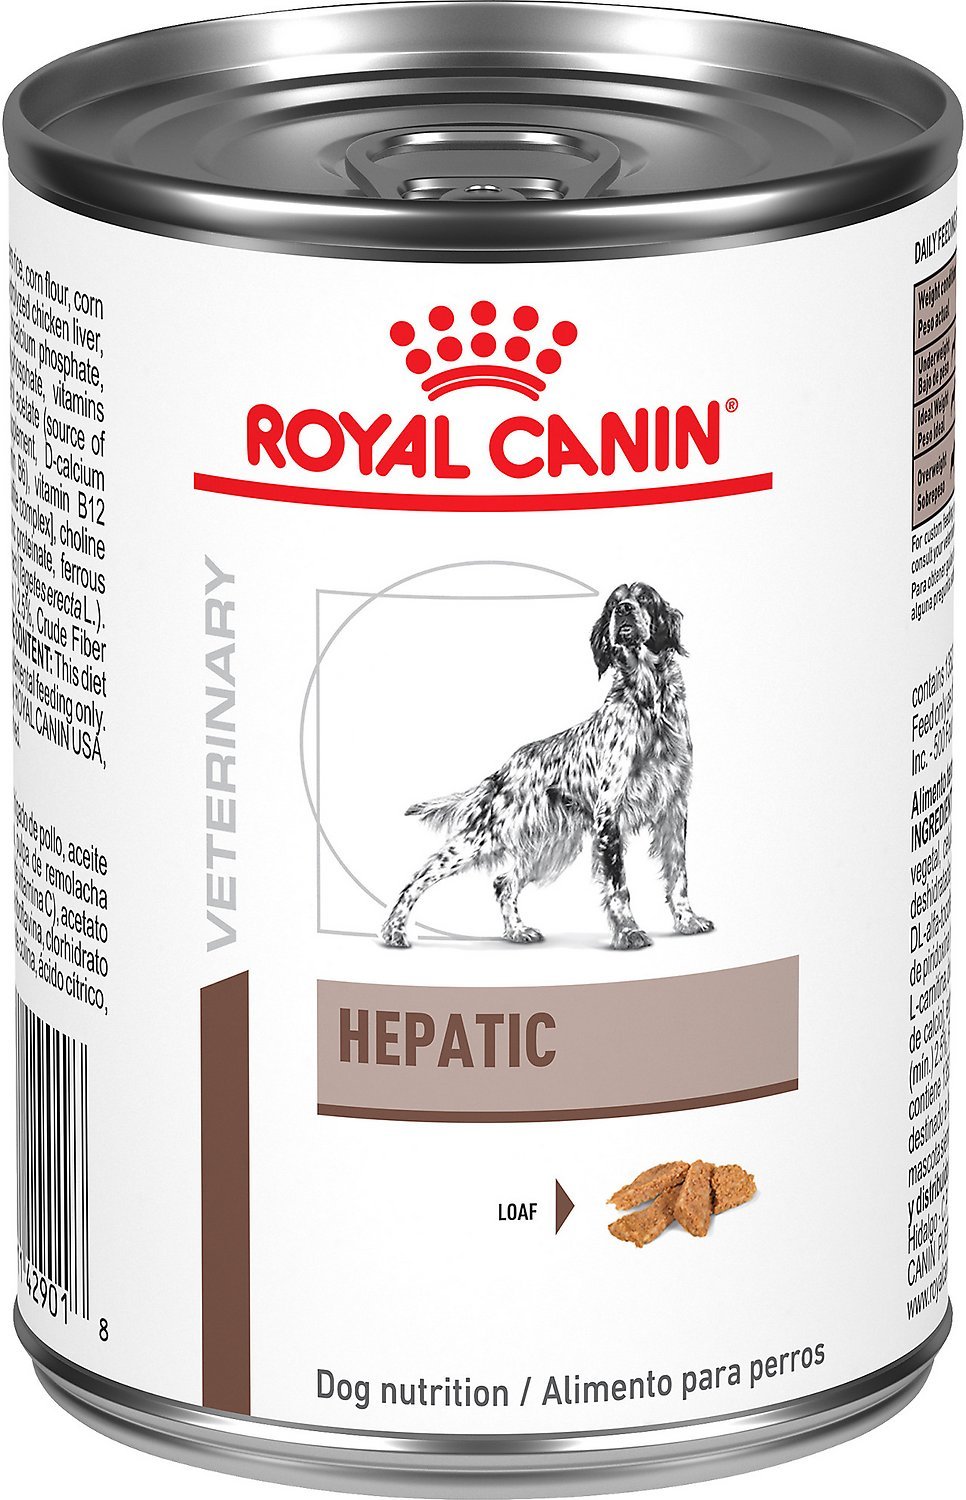 Royal Canin Veterinary Diet Hepatic Formula Canned Dog Food, 14.5